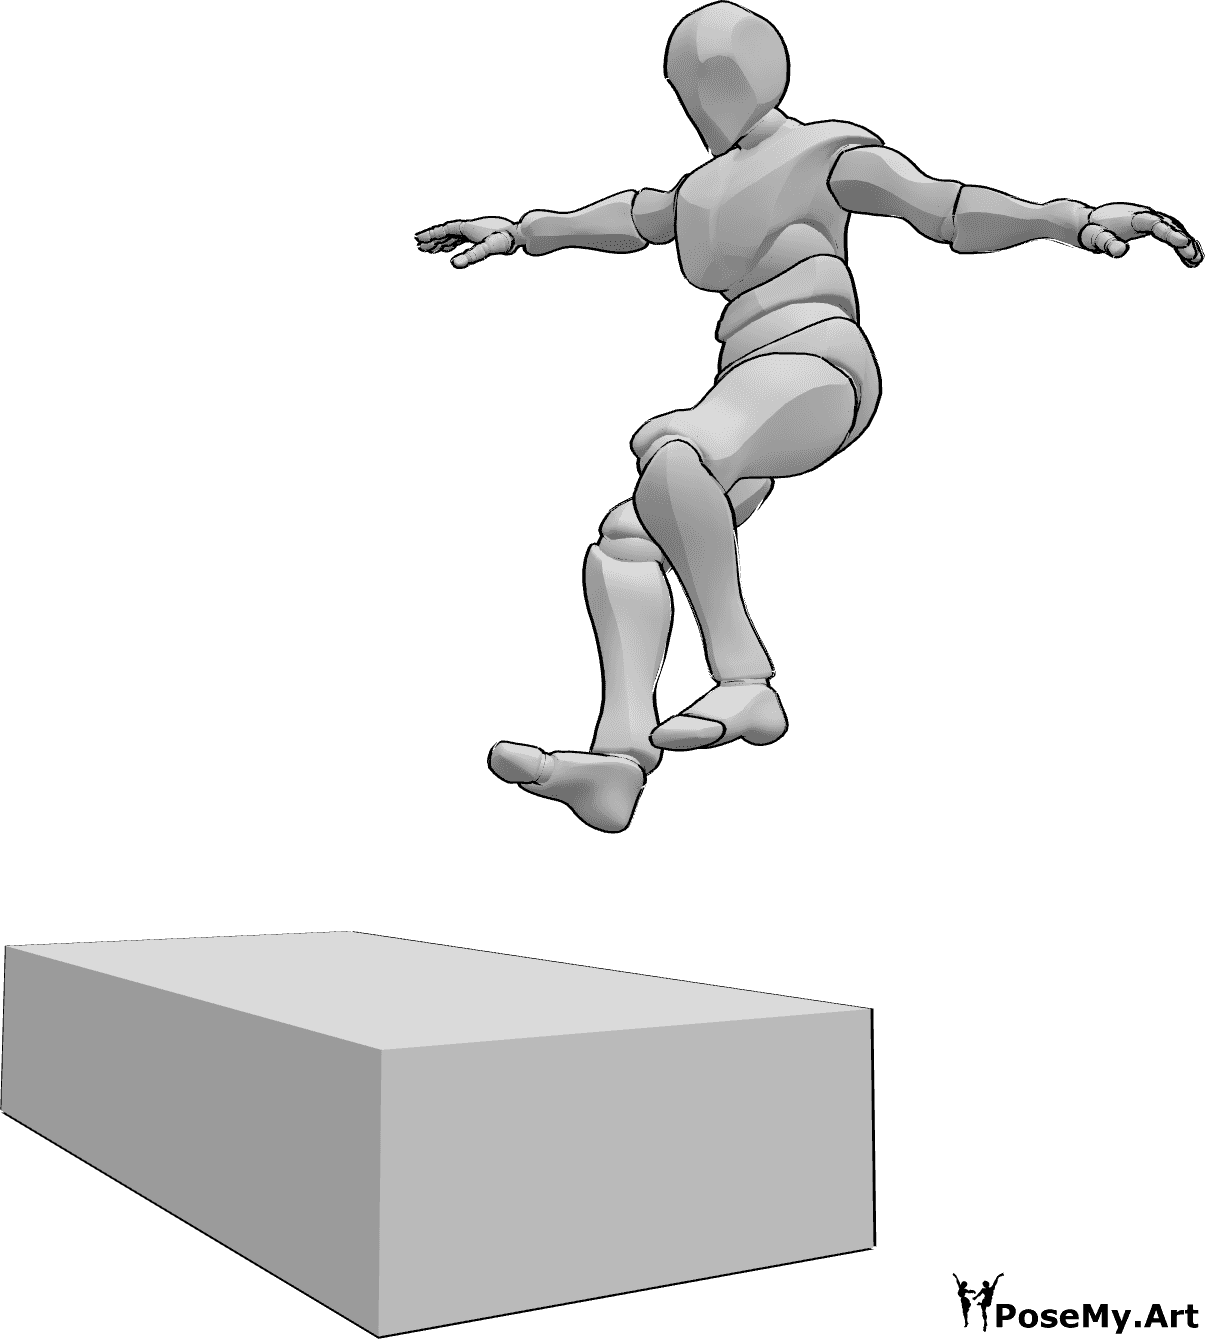 Pose Reference - Parkour landing wall pose - Male is jumping from high, preparing for landing on a wall, spreads his arms